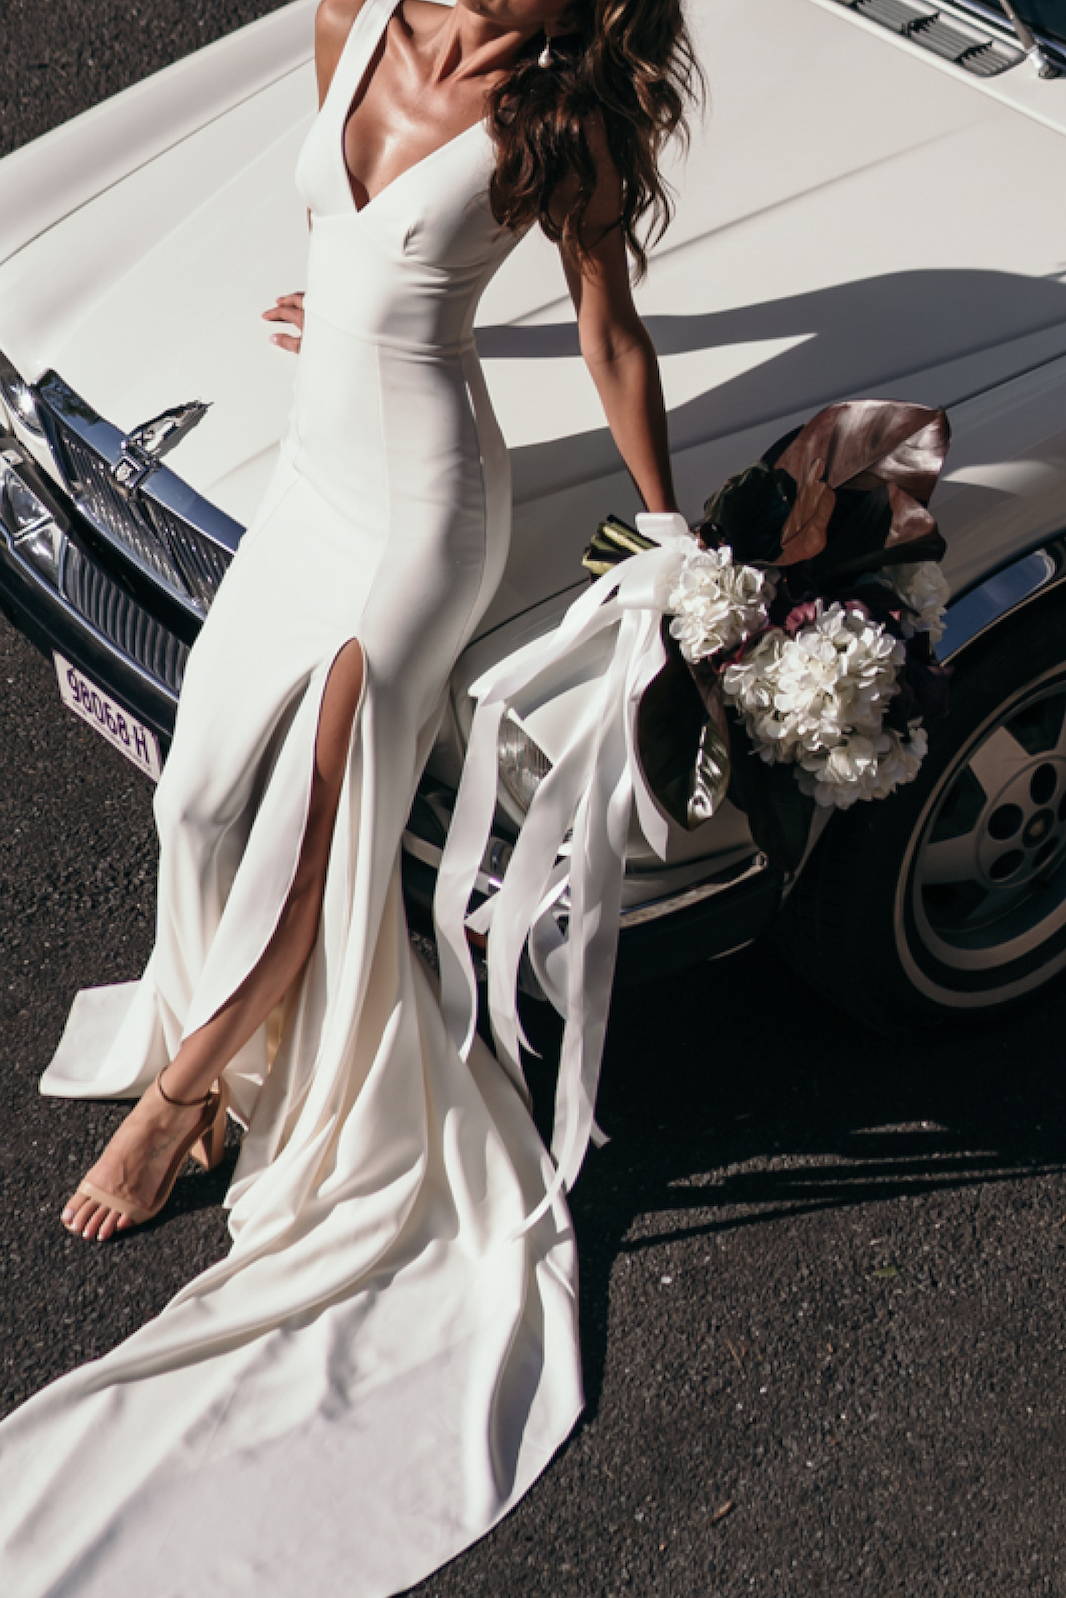 Model sitting on vintage car holding white bouquet of flowers